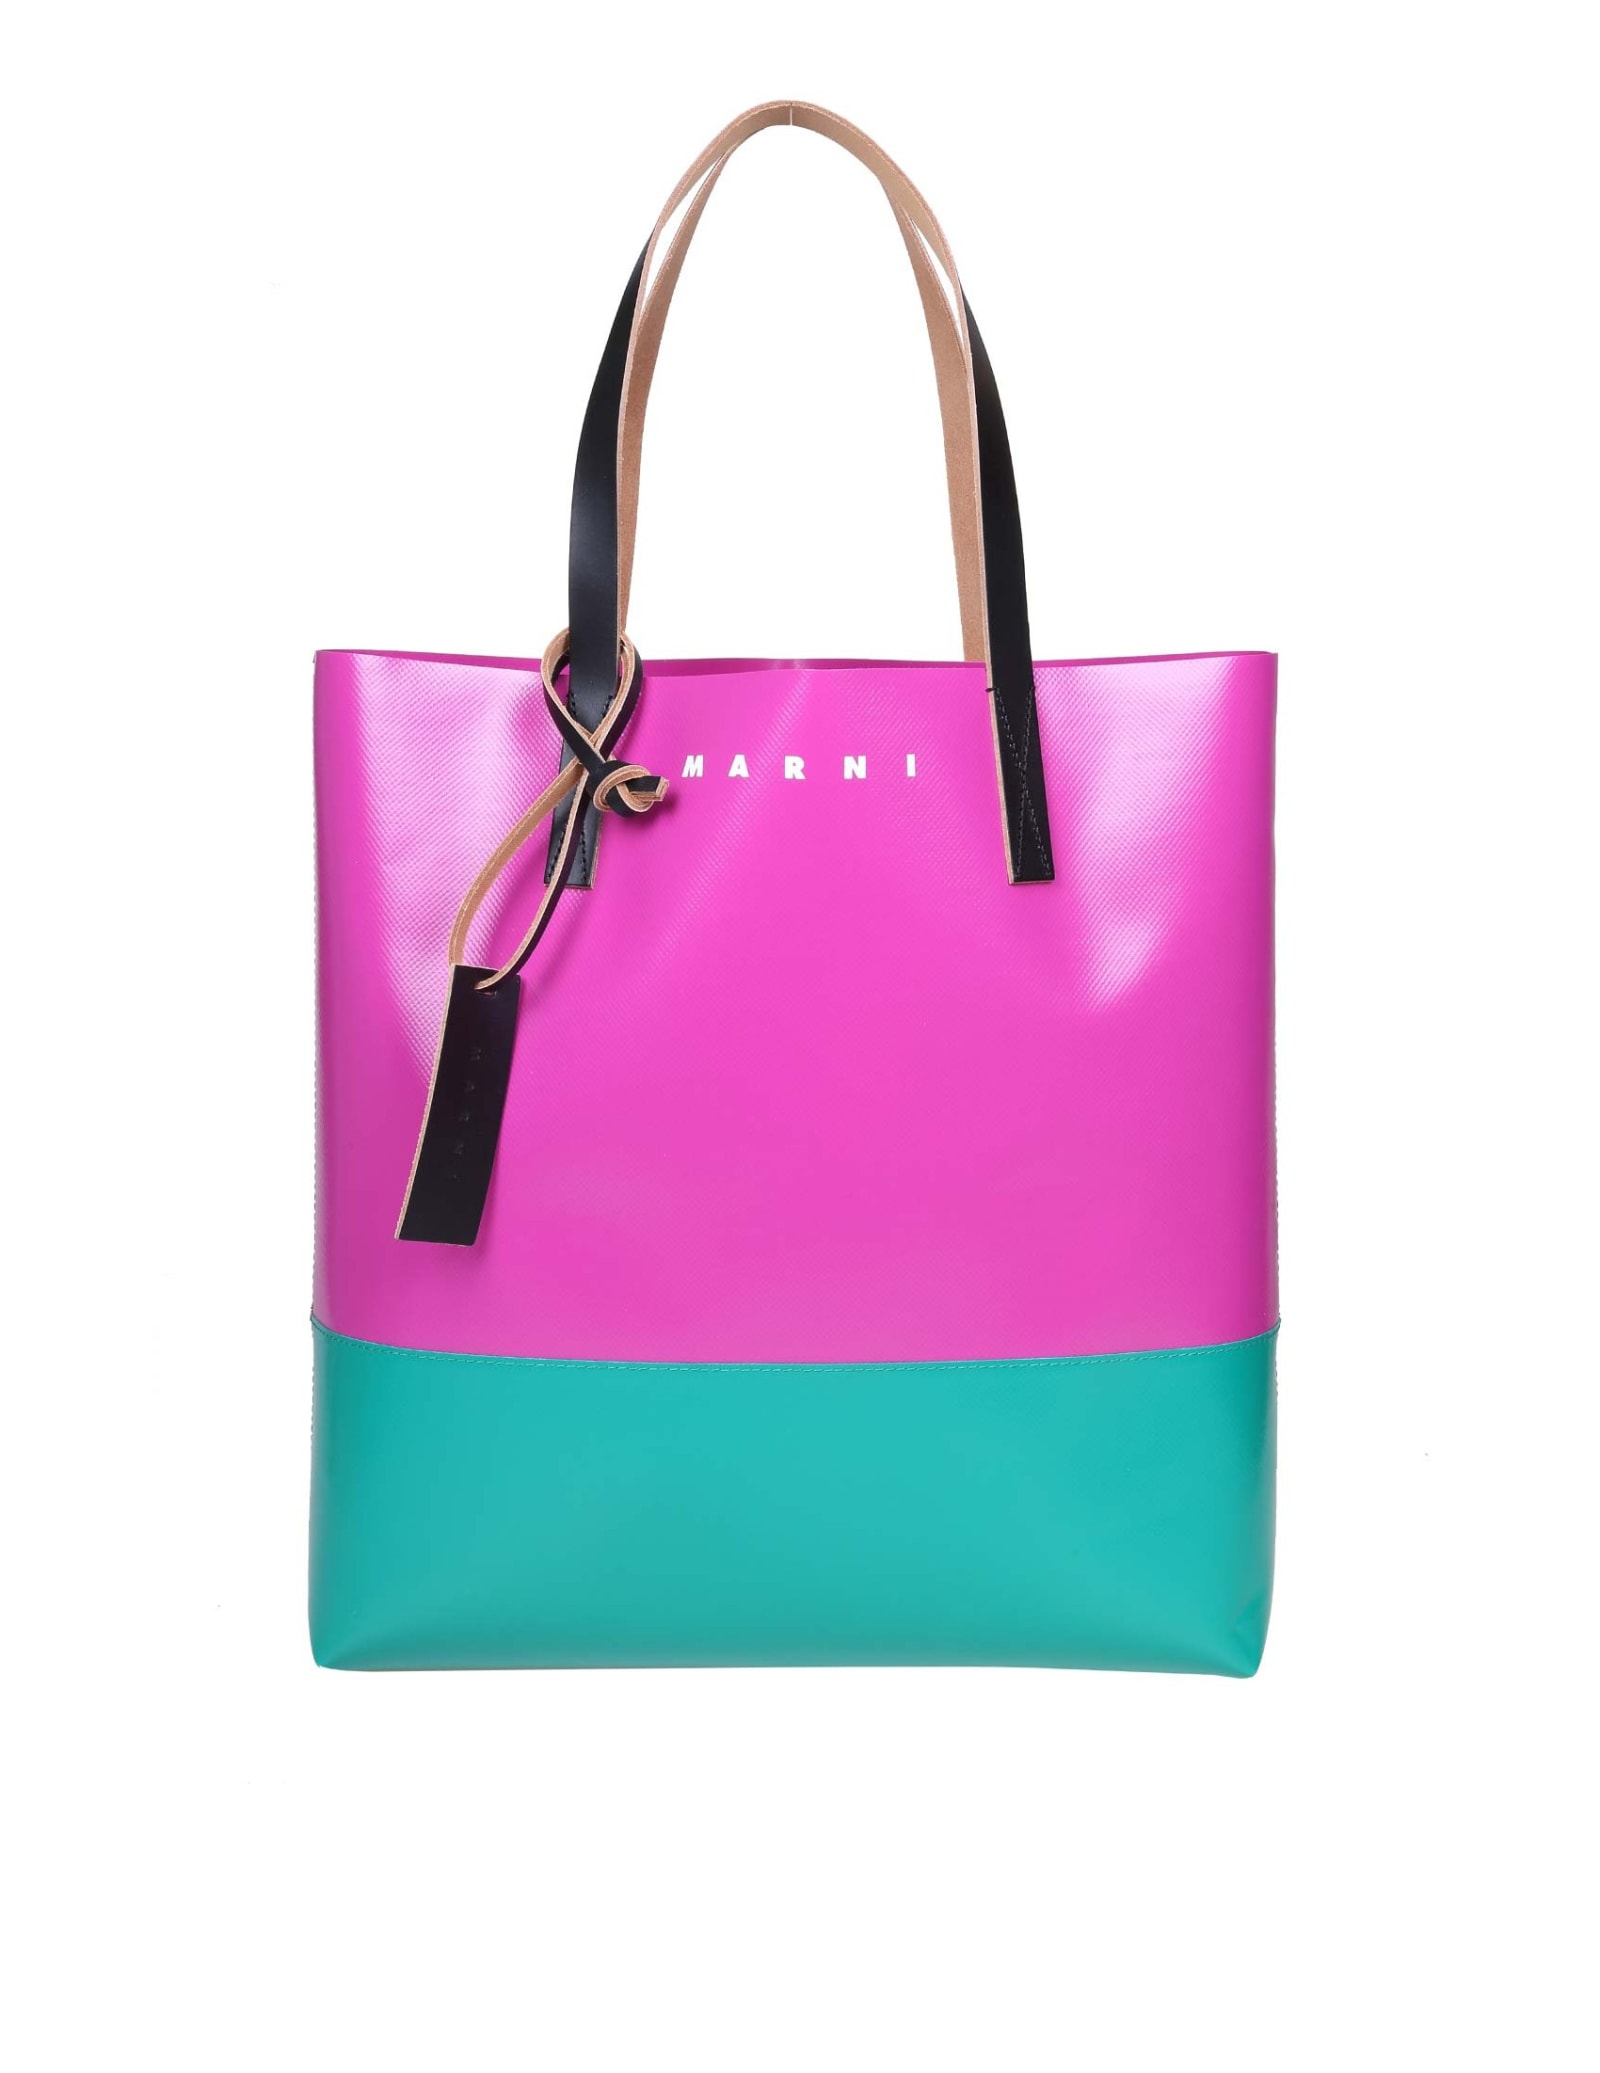 Marni Shopping Bag In Leather And Cellulose Color Green And Fuchsia